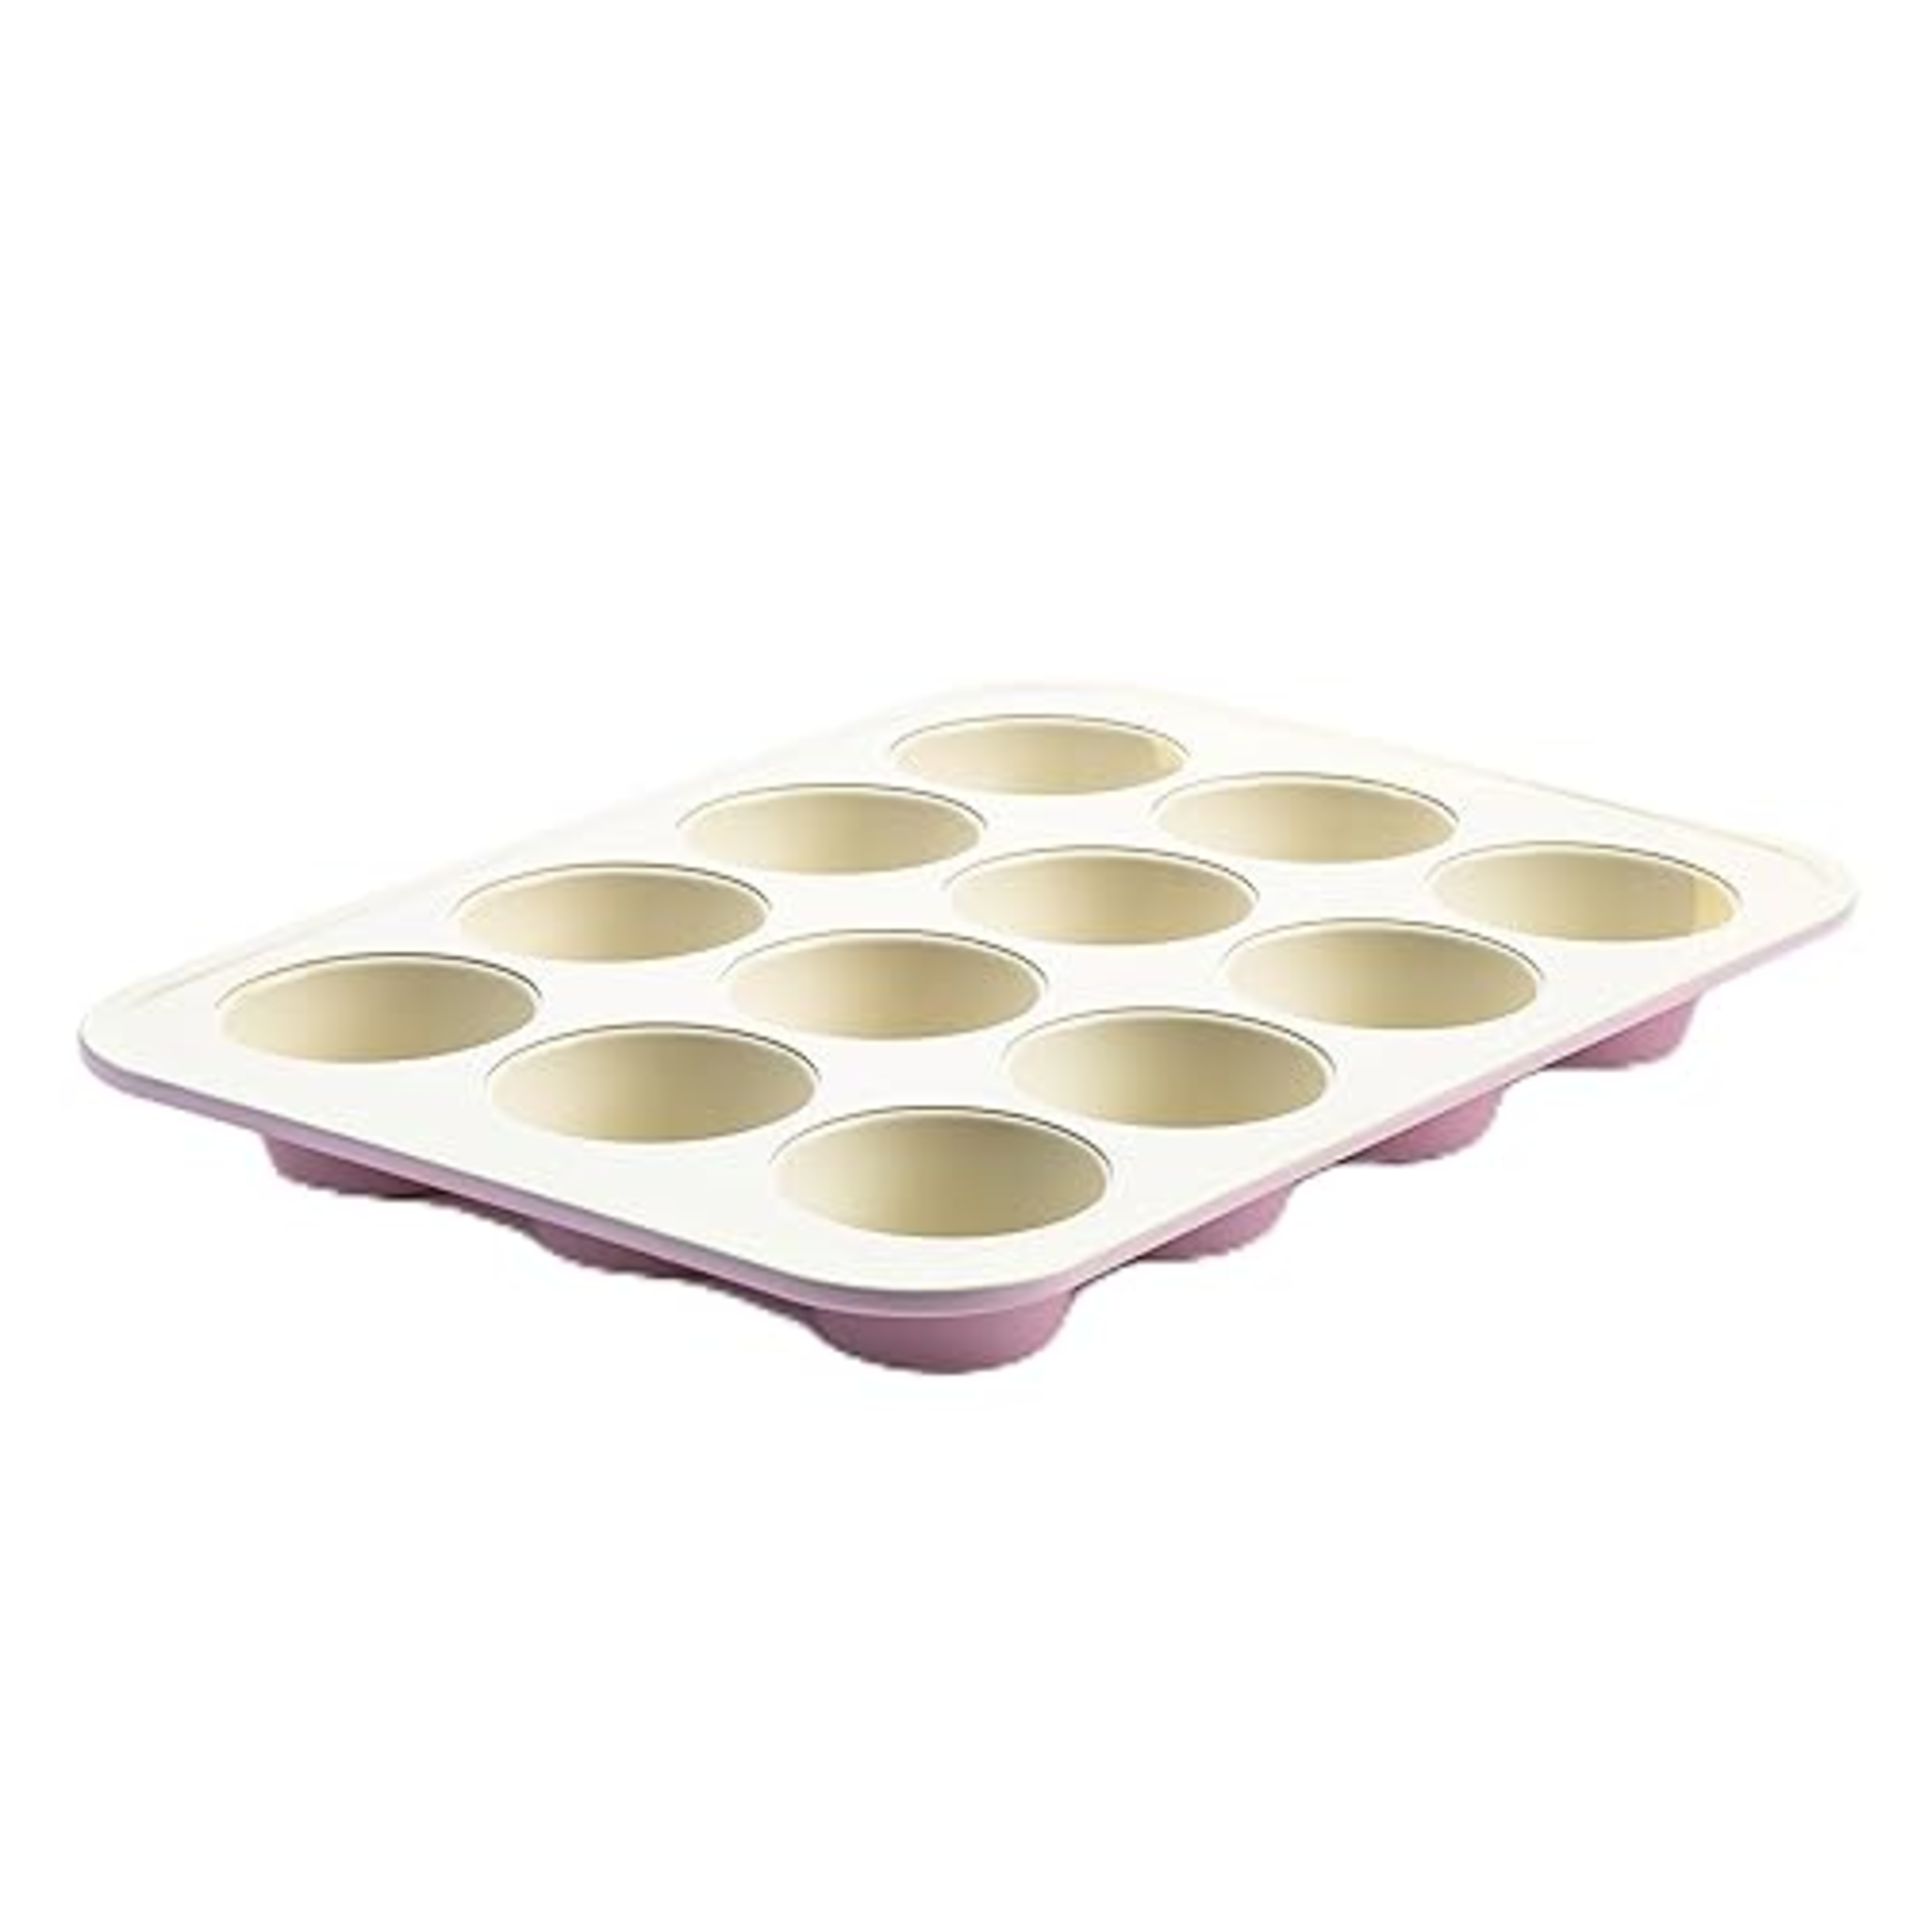 GreenLife Healthy Ceramic Non-Stick 12-Cup Muffin Tray, PFAS-Free, Pink